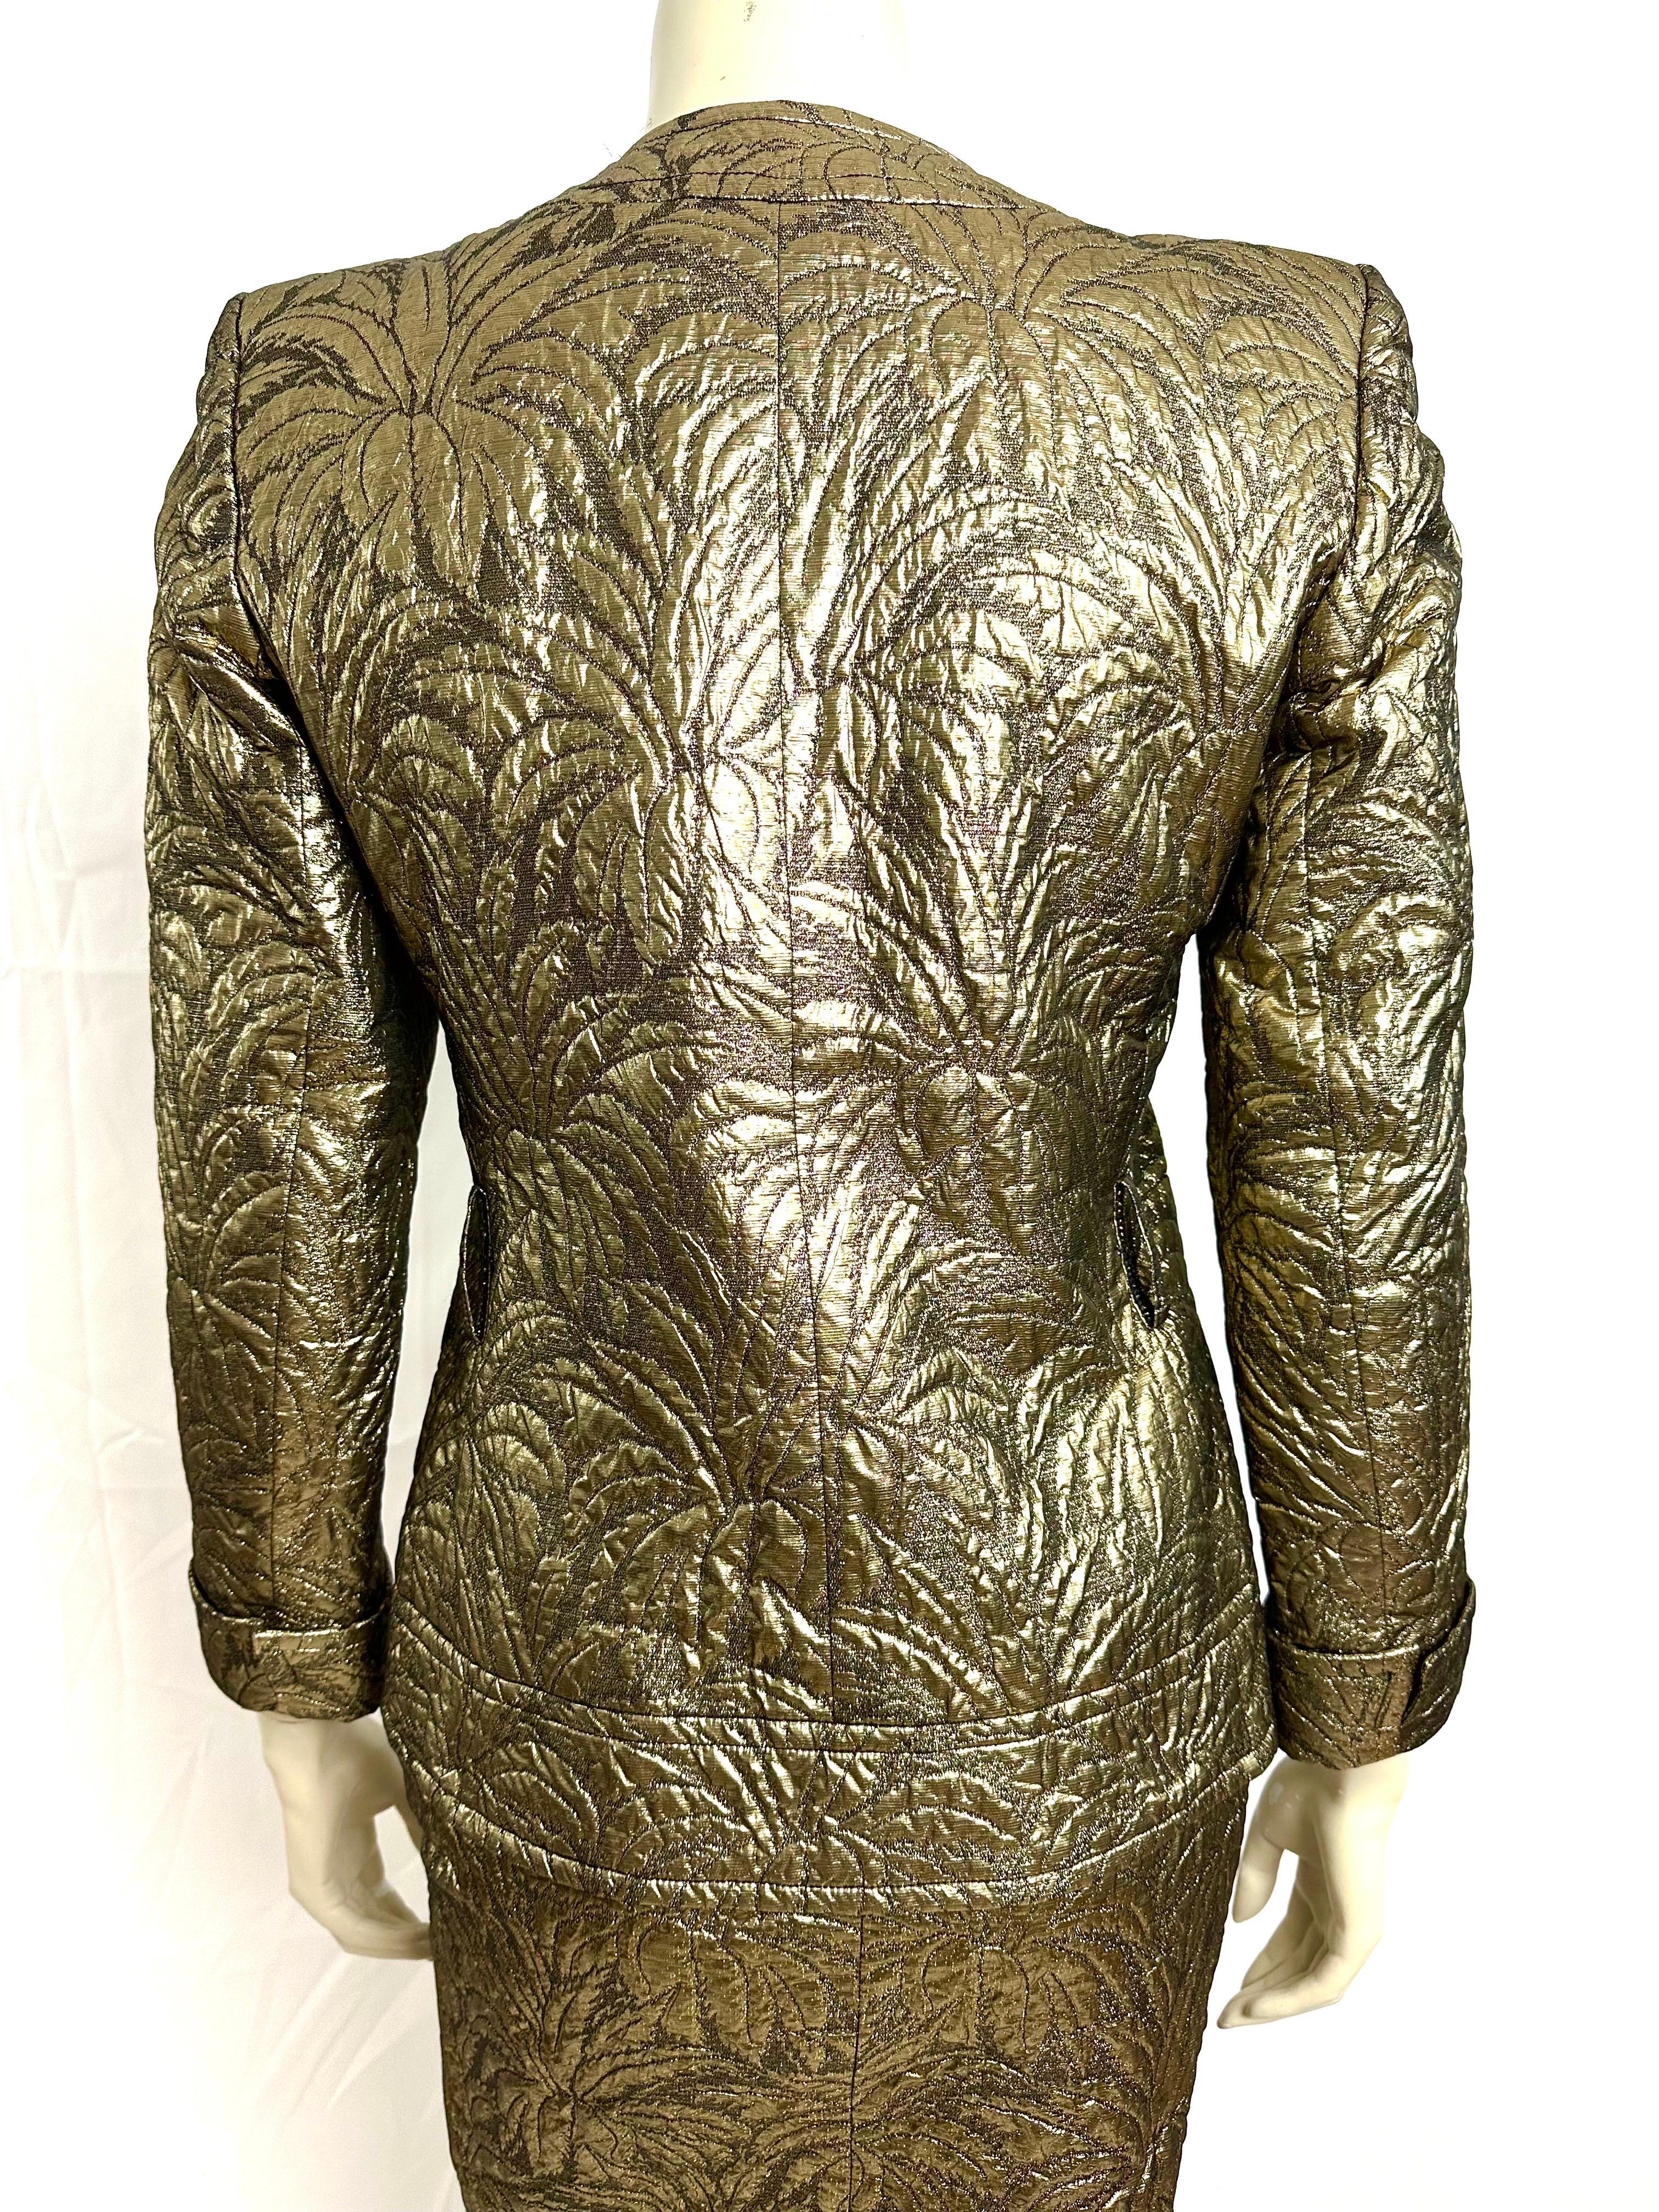 YSL Yves saint Laurent gold brocade skirt suit F/W 86 For Sale 7